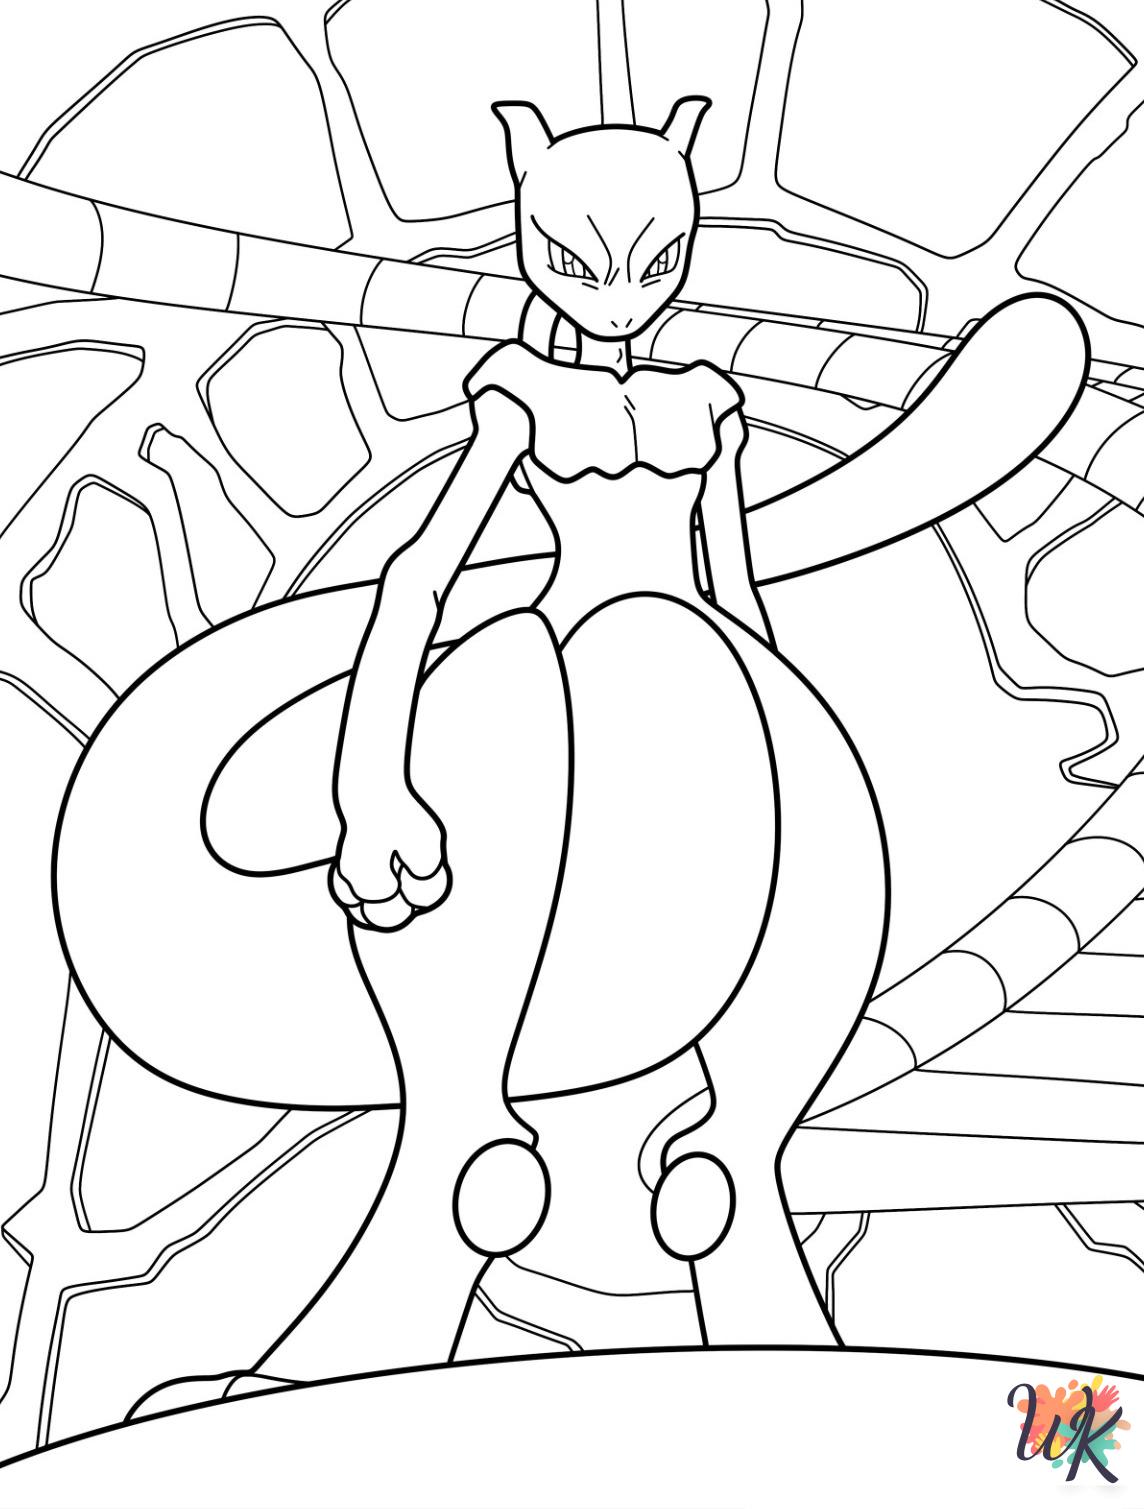 Legendary Pokemon coloring pages grinch